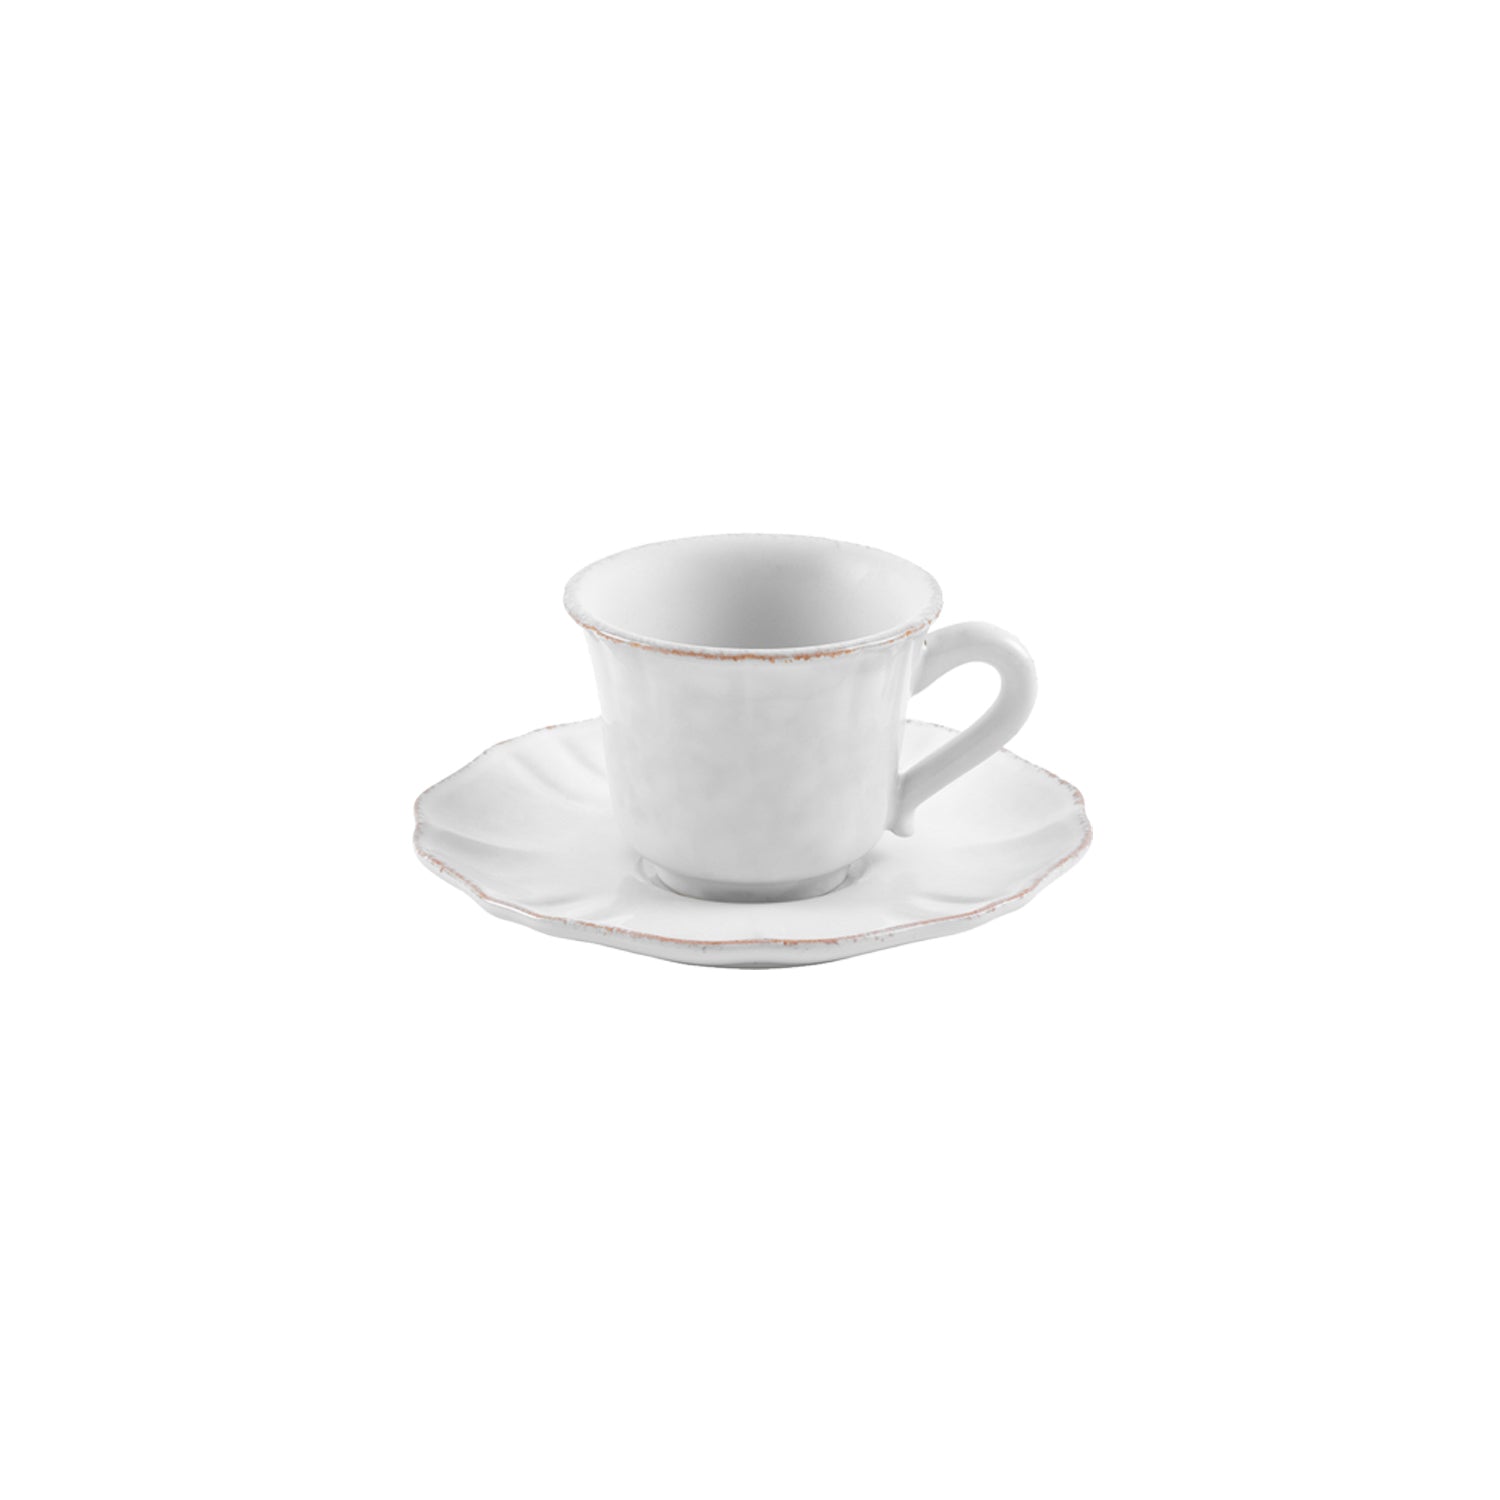 Impressions Coffee Cup and Saucer 3 oz. White